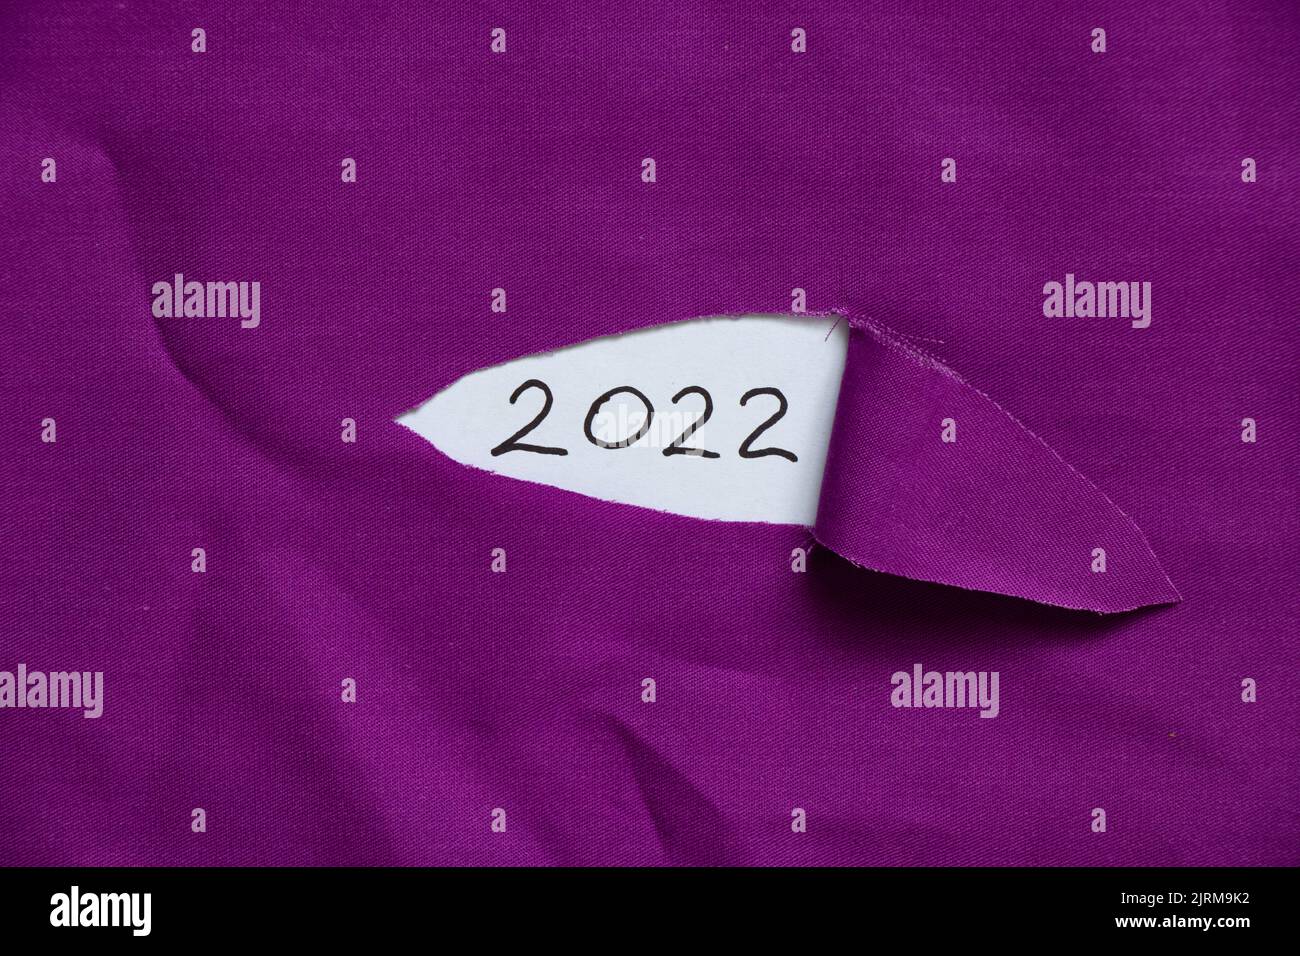 2022 written on paper on torn fabric, happy new year 2022, text Stock Photo